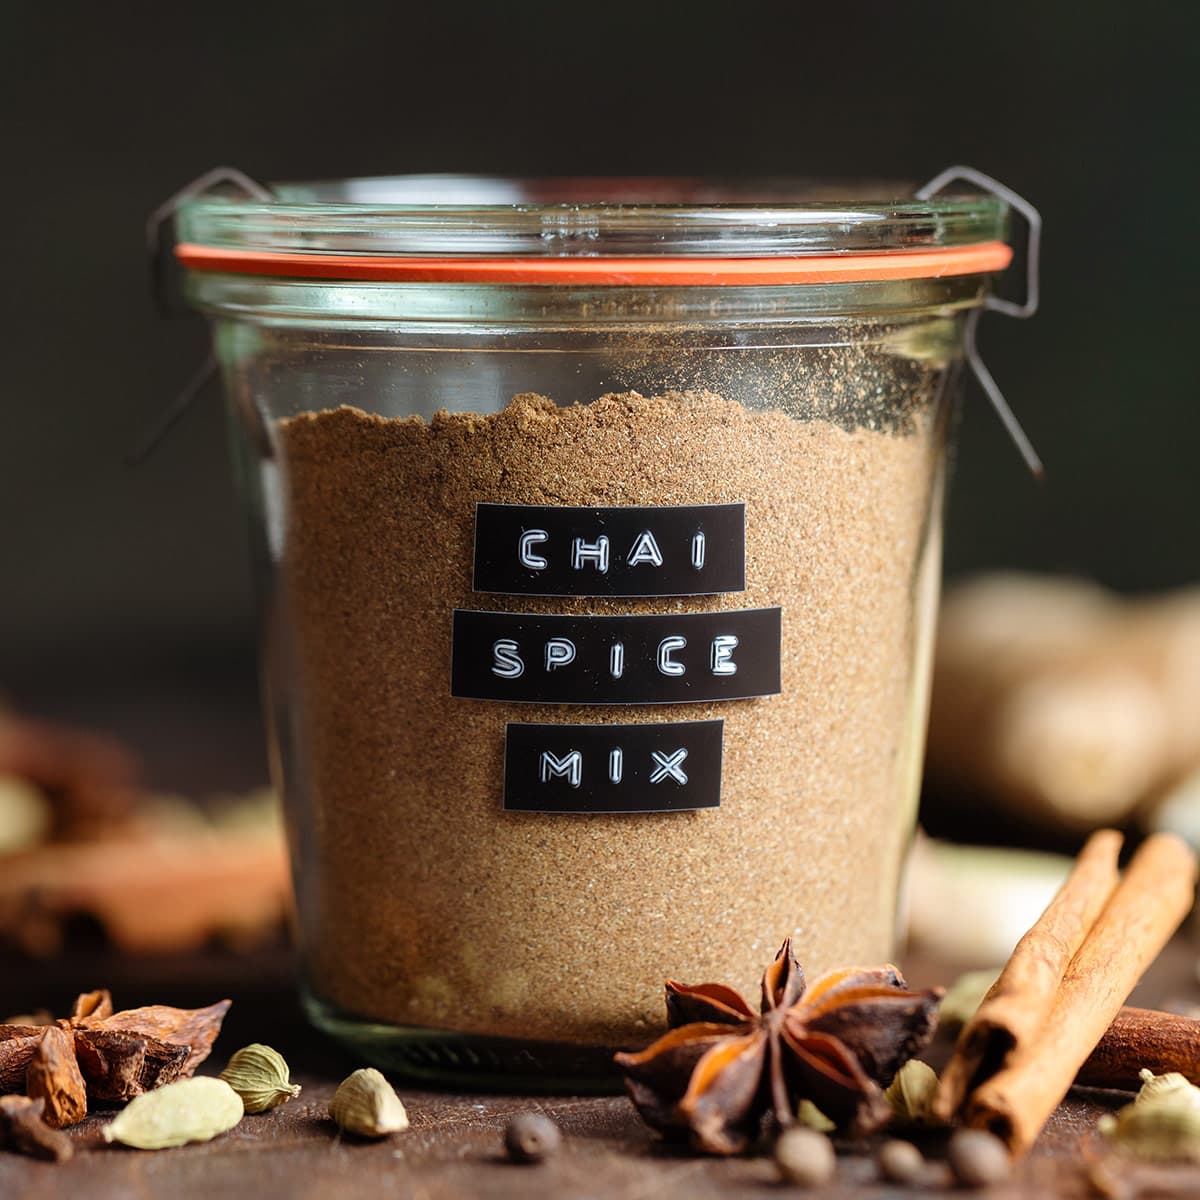 This Chai Spice Mix has all the flavor and none of the caffeine! You can use it in baking, pancakes, oatmeal, hot chocolate, coffee, smoothies, and more! So easy and so good! #chaispice thehealthfulideas.com/chai-spice-mix…